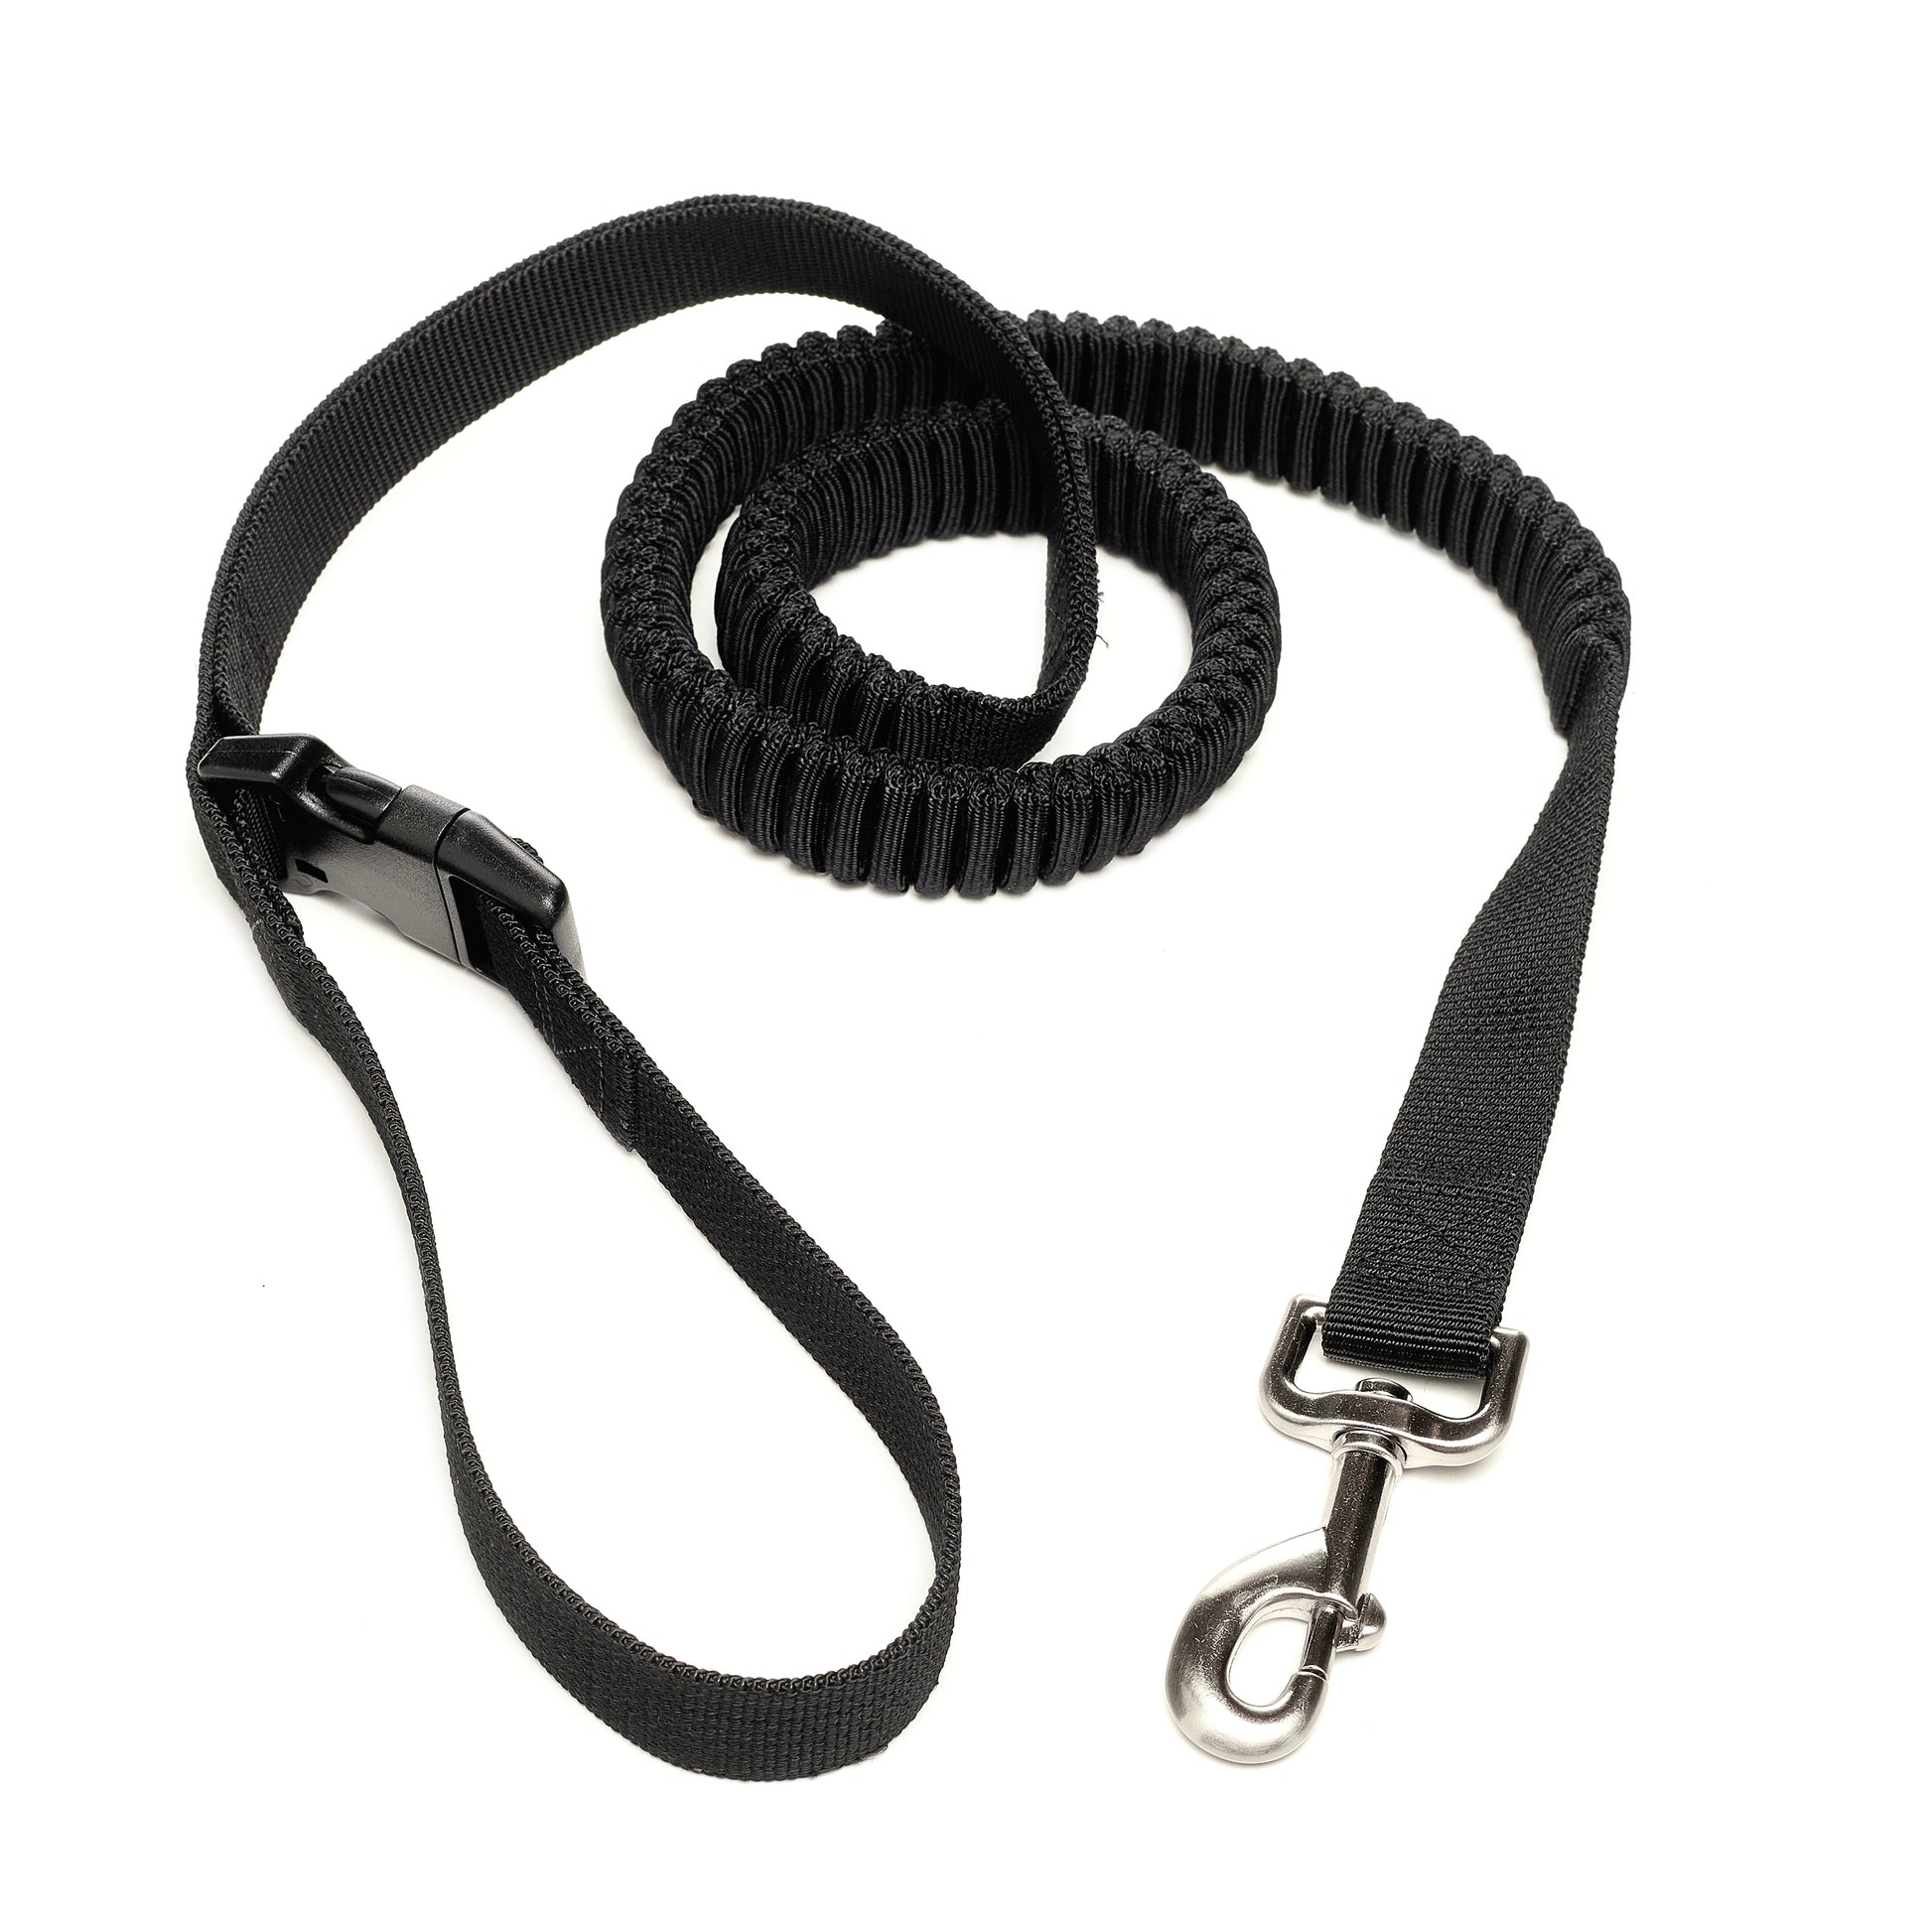 Pets for Peace Uptown Dog Leash